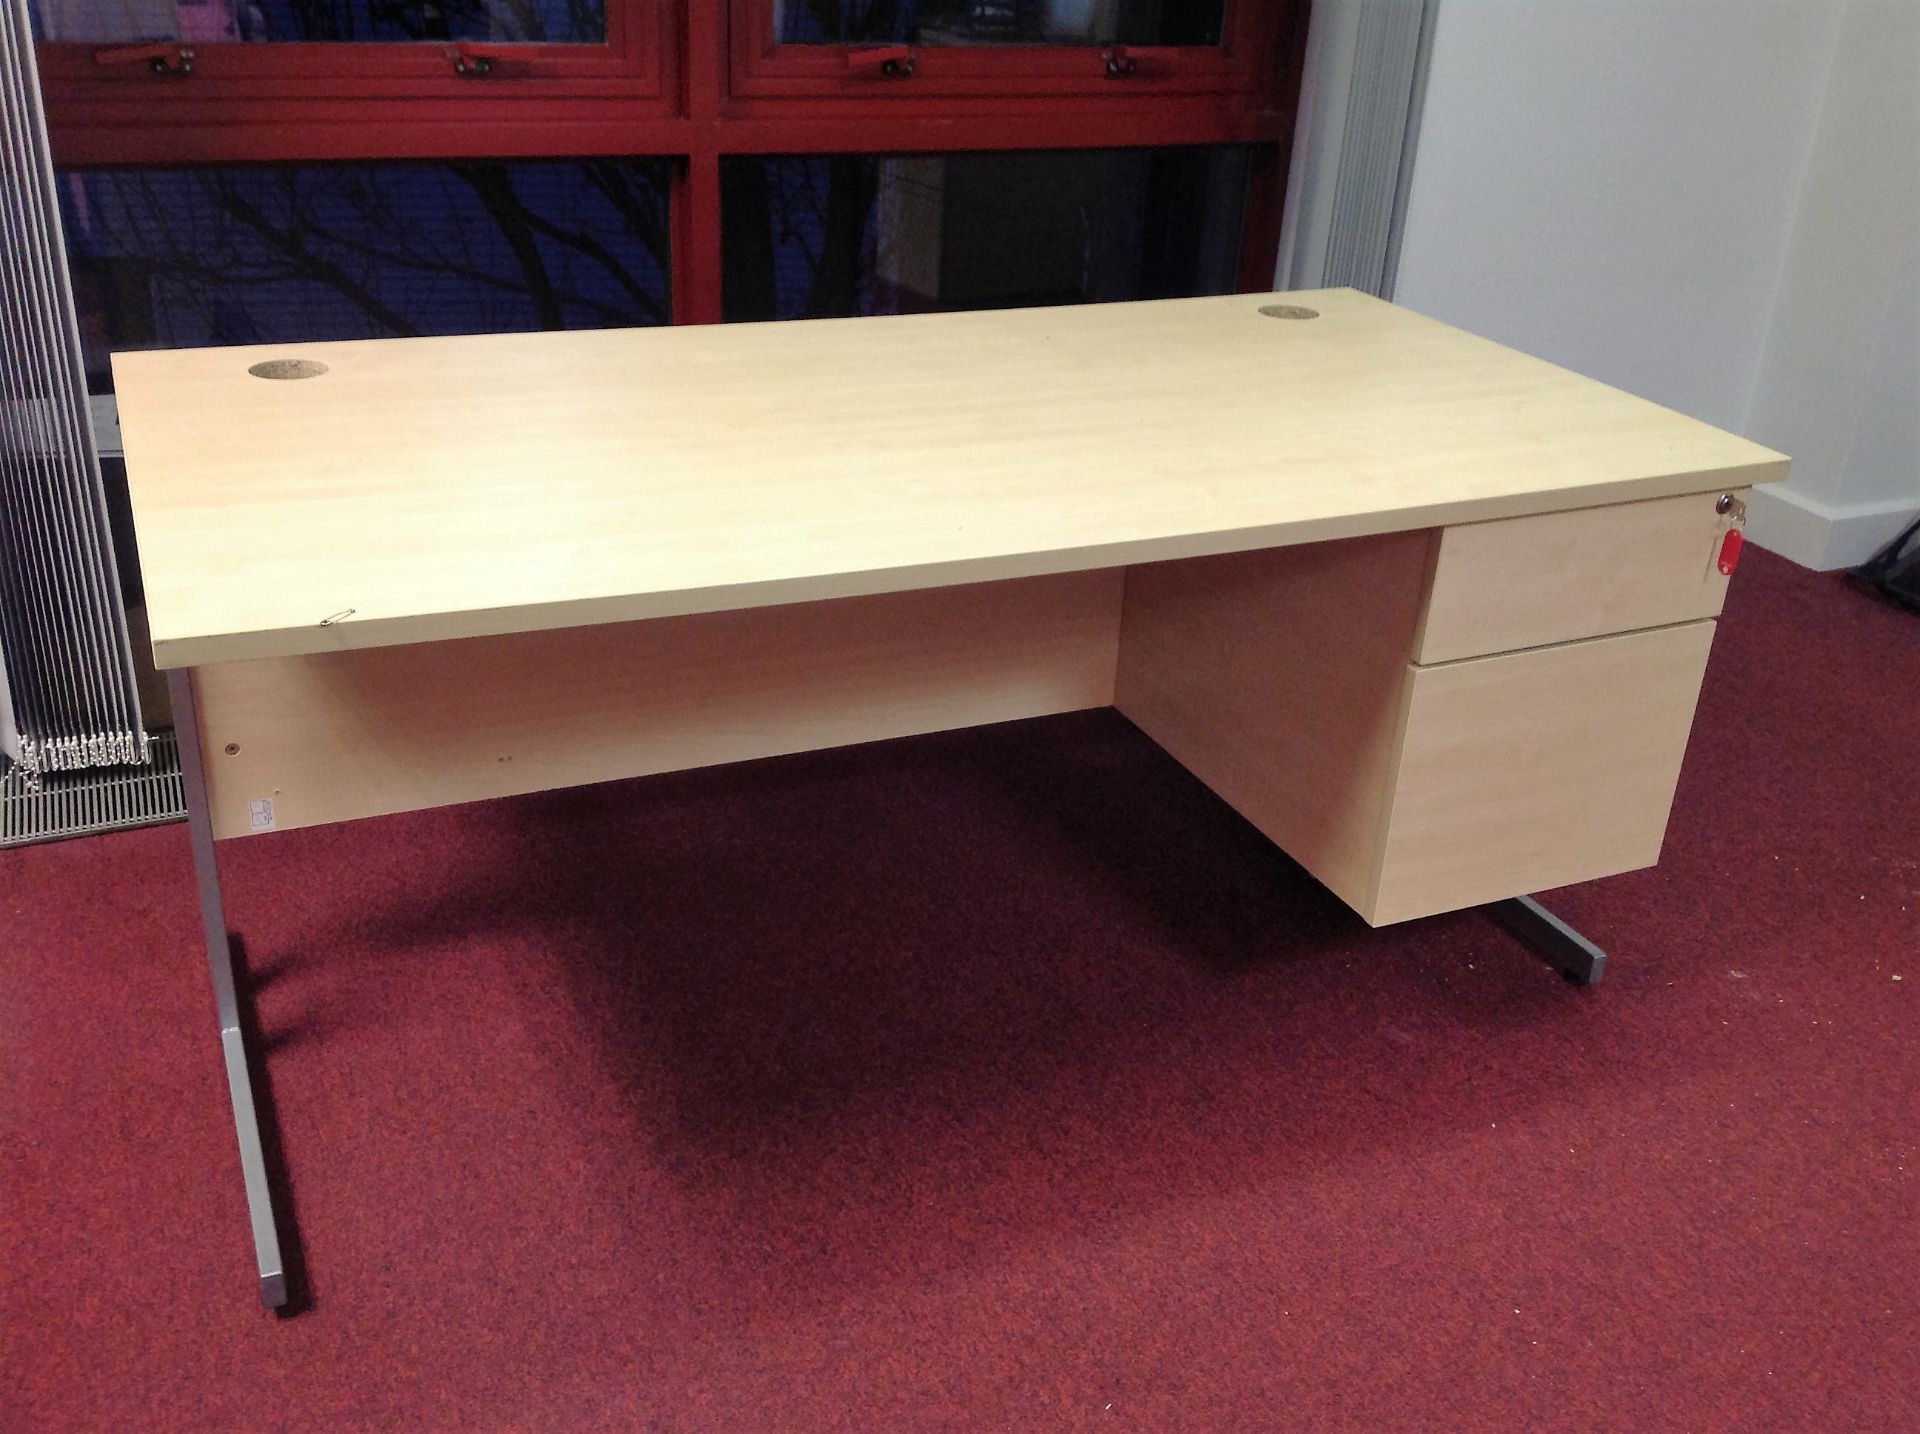 Rectangular Desk With Two Draw Unit Attached To The Right With Keys - Measurements: H: 72cm L: 160cm - Image 2 of 3